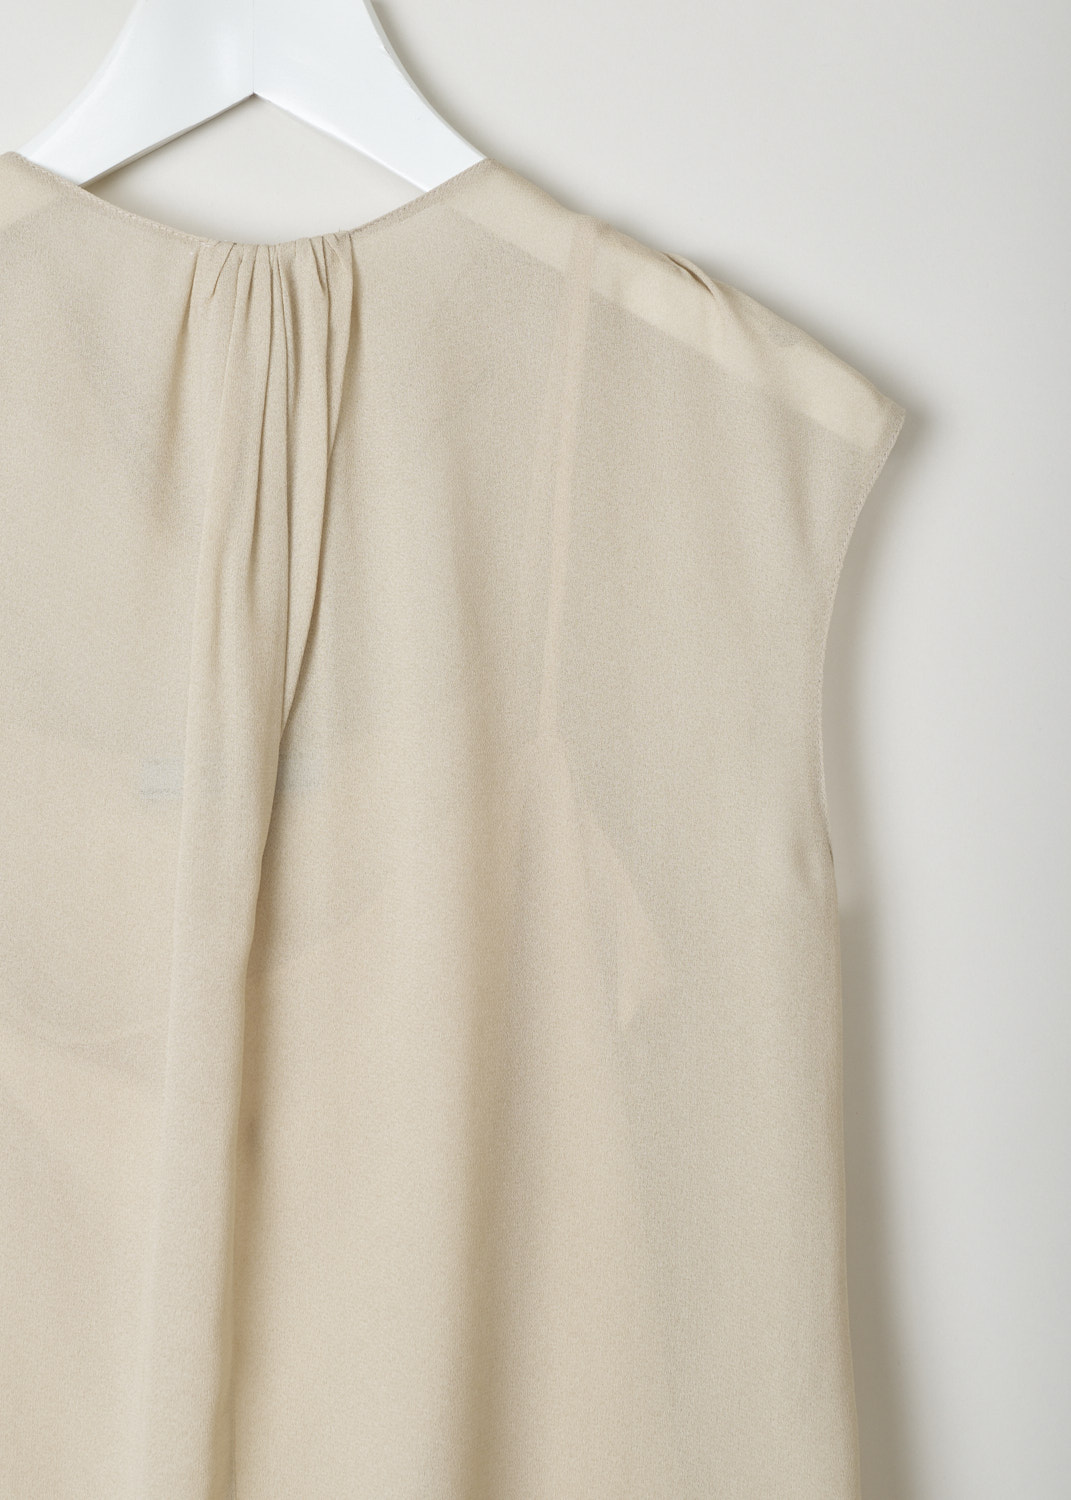 Prada, Sand coloured sleeveless top with self-tie detail, crepe_sable_P925H_F0036_sabbia, beige, detail, A lovely sleeveless design, comes with a round neckline on the front, and a scoop neck on the back, where also a self-tie feature can be found. Furthermore, tiny crystal pleats decorate the neckline and flow down the front 